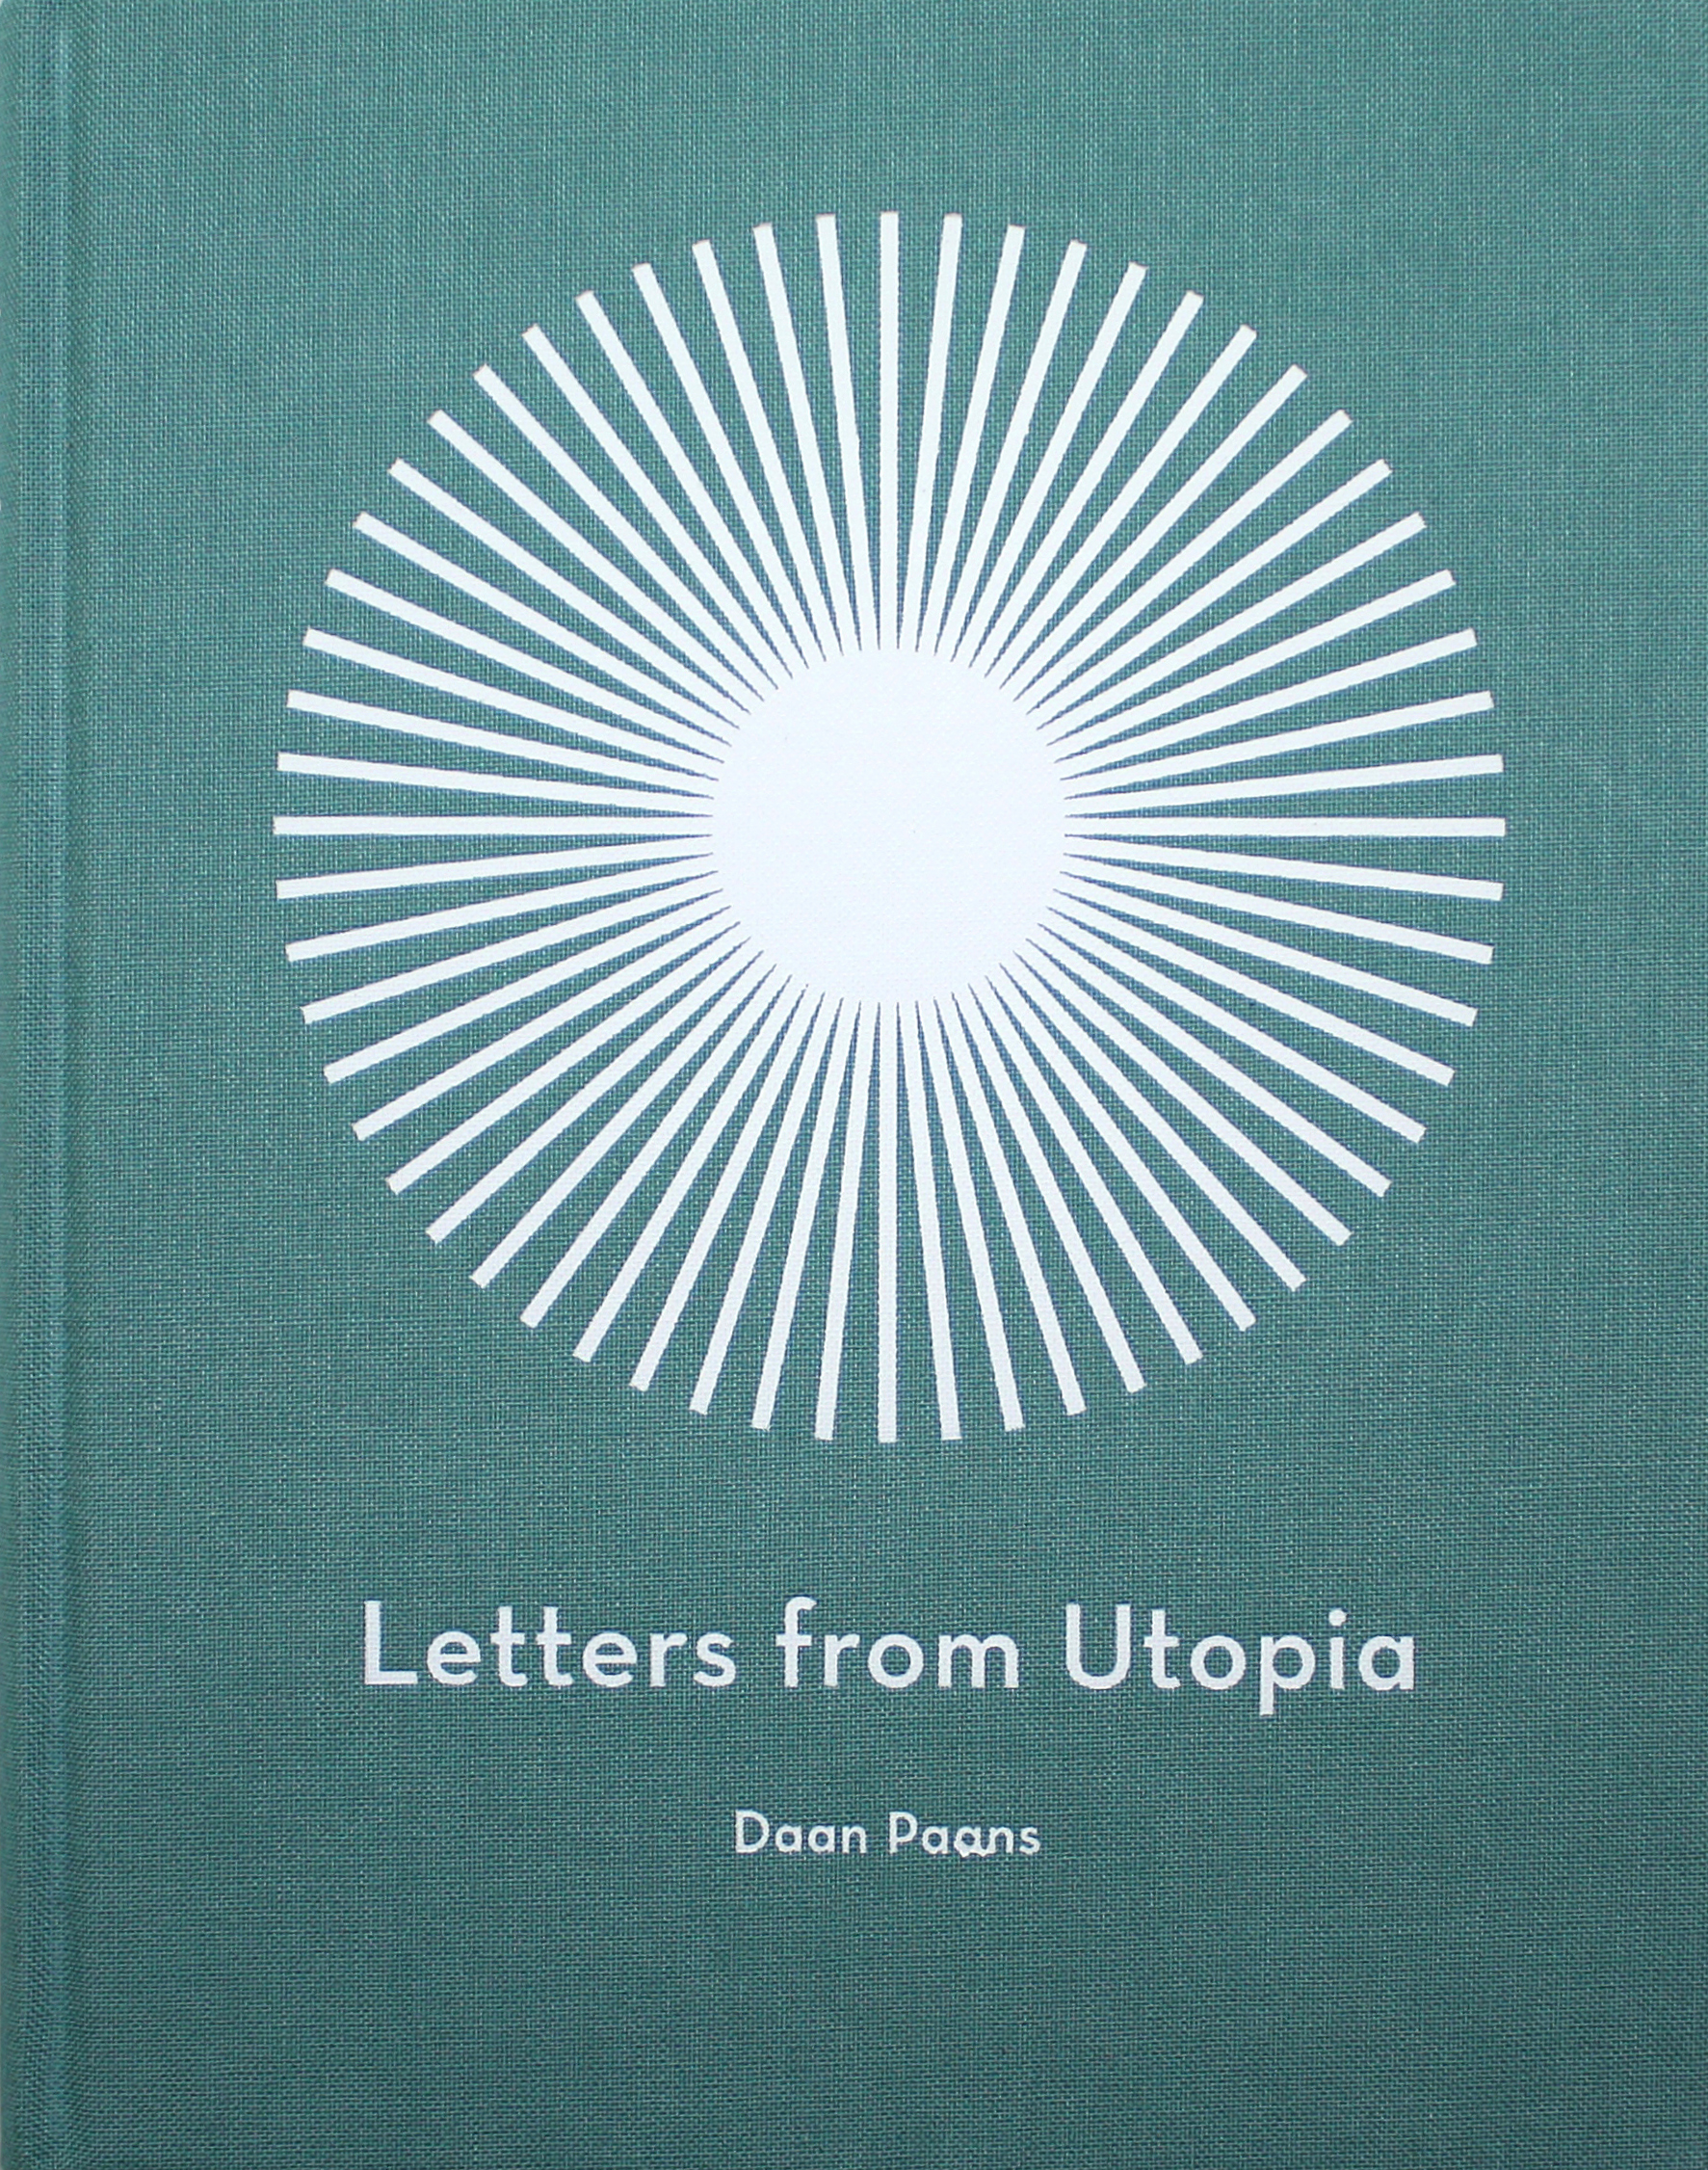 Daan Paans - Letters From Utopia